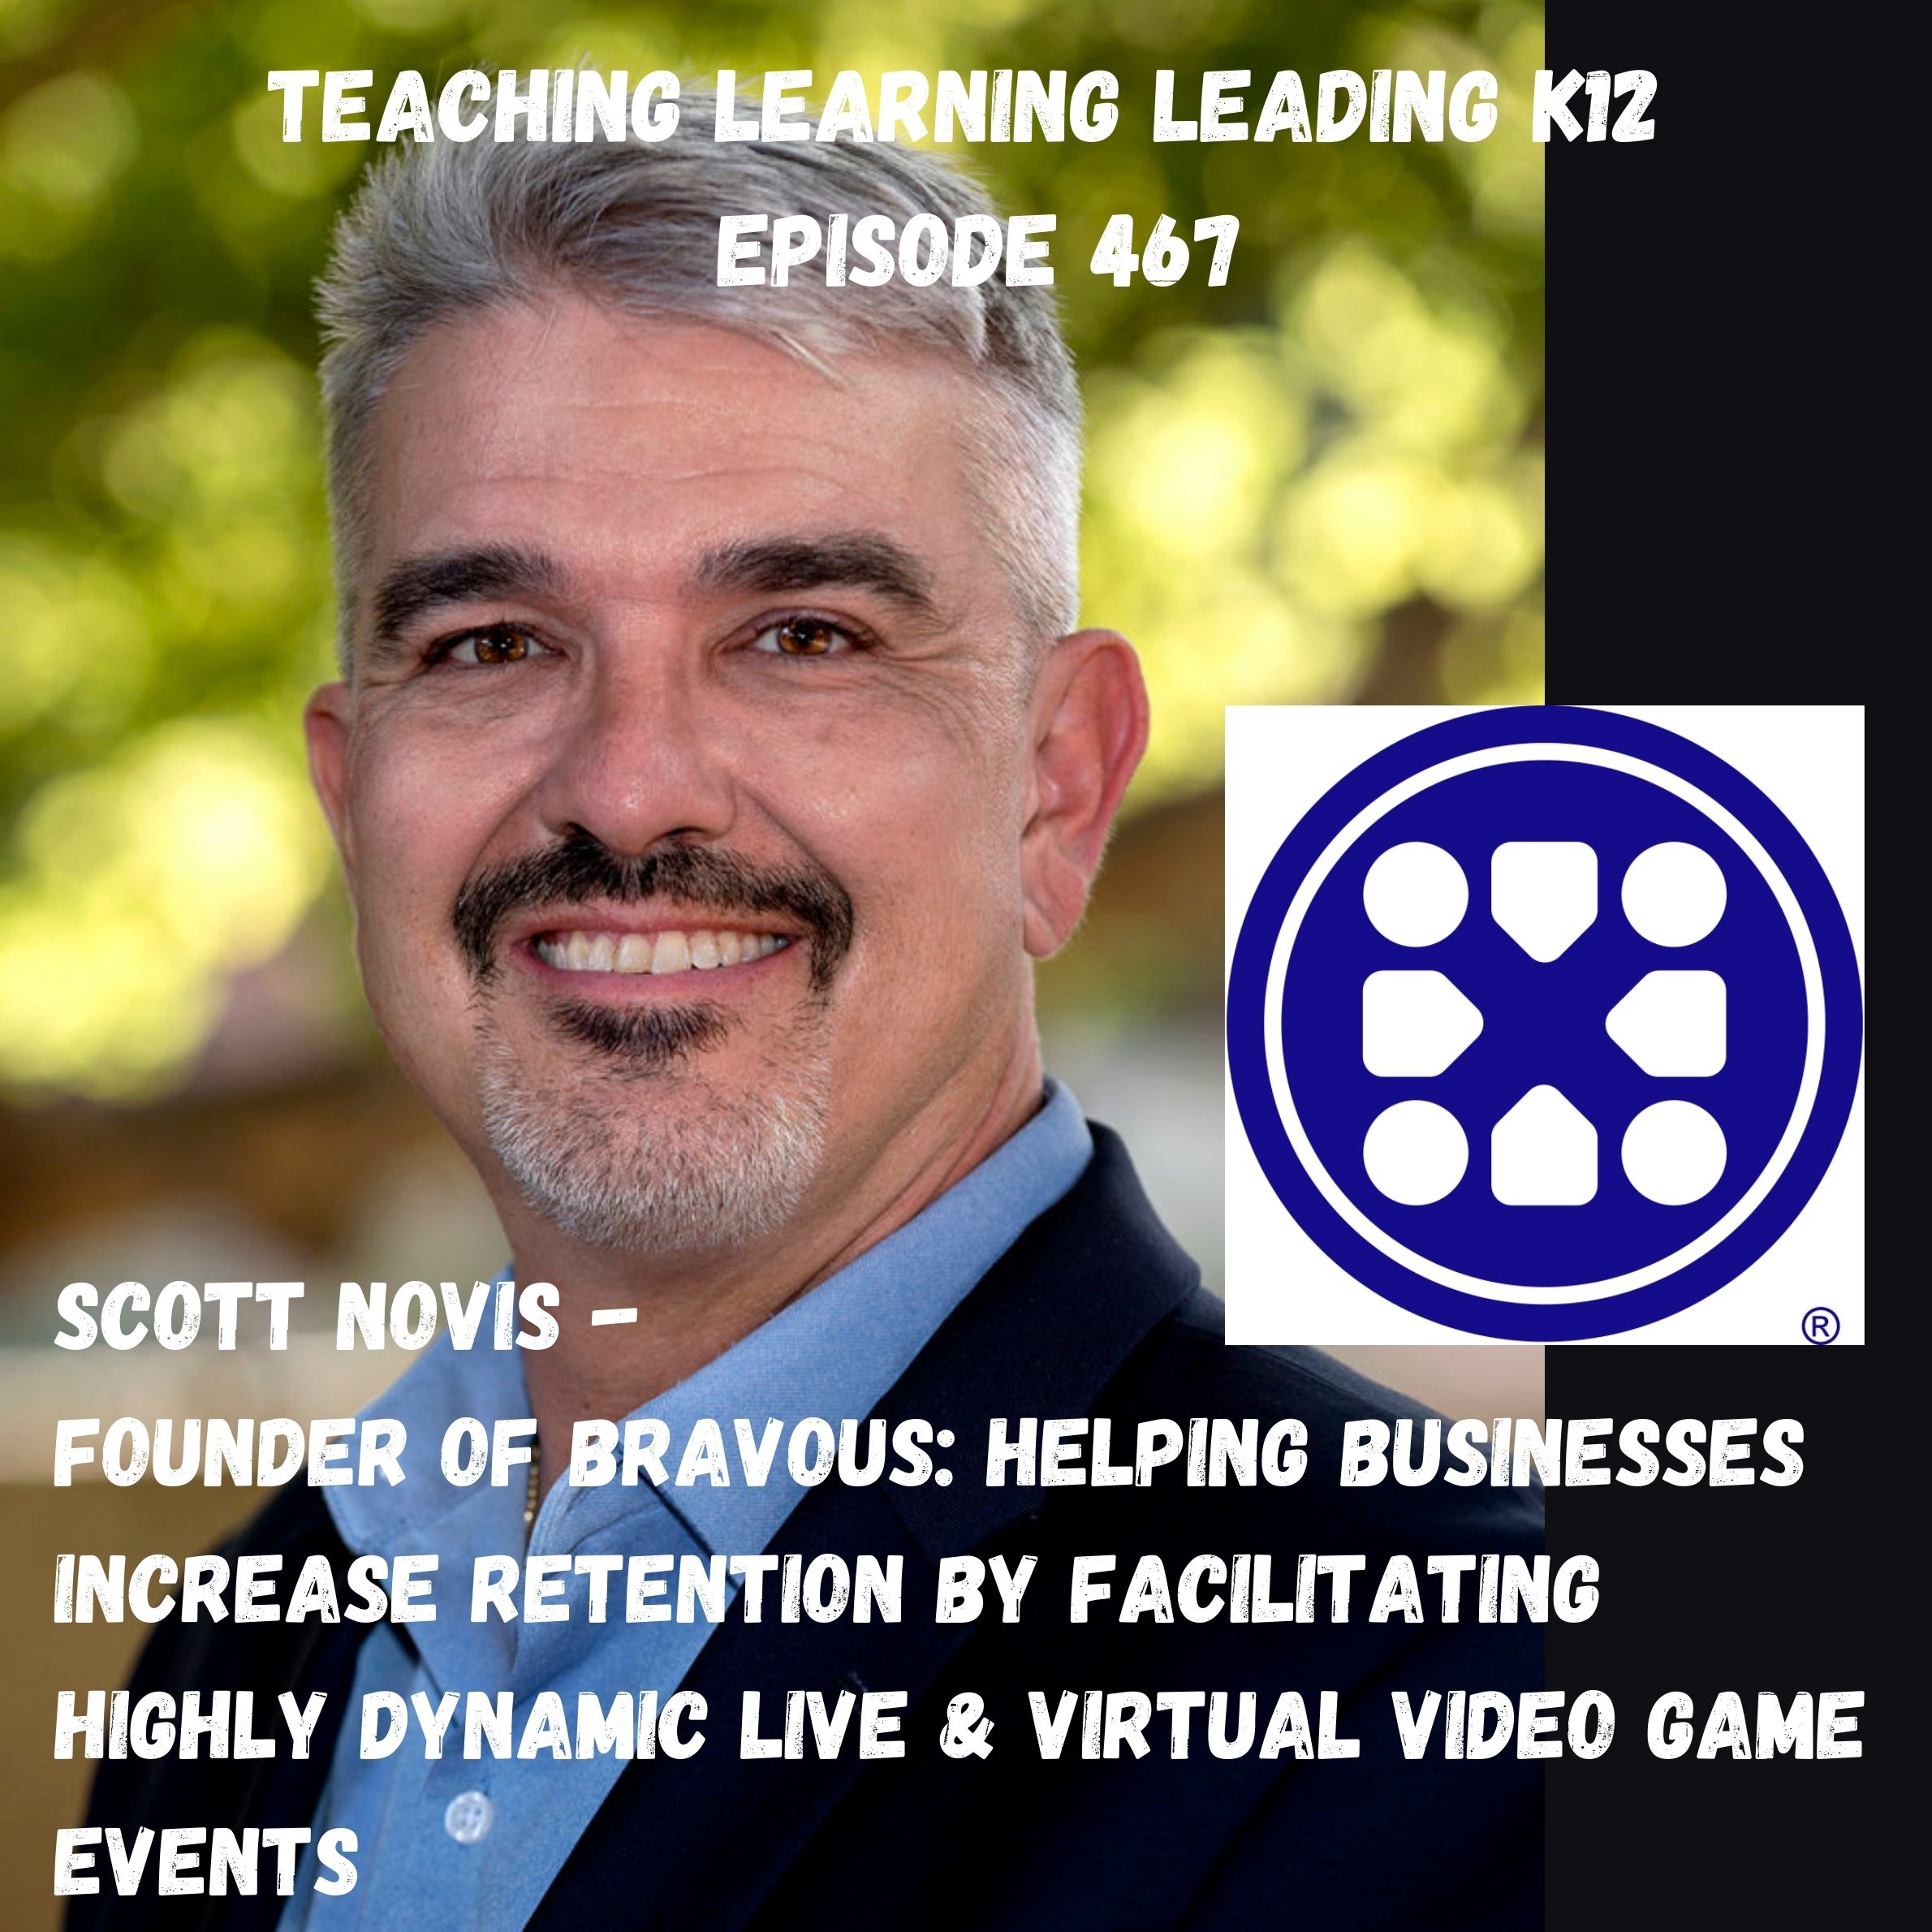 Scott Novis - Founder of Bravous - Helping Businesses Increase Retention By Facilitating Highly Dynamic Live & Virtual Video Game Events - 467 Image